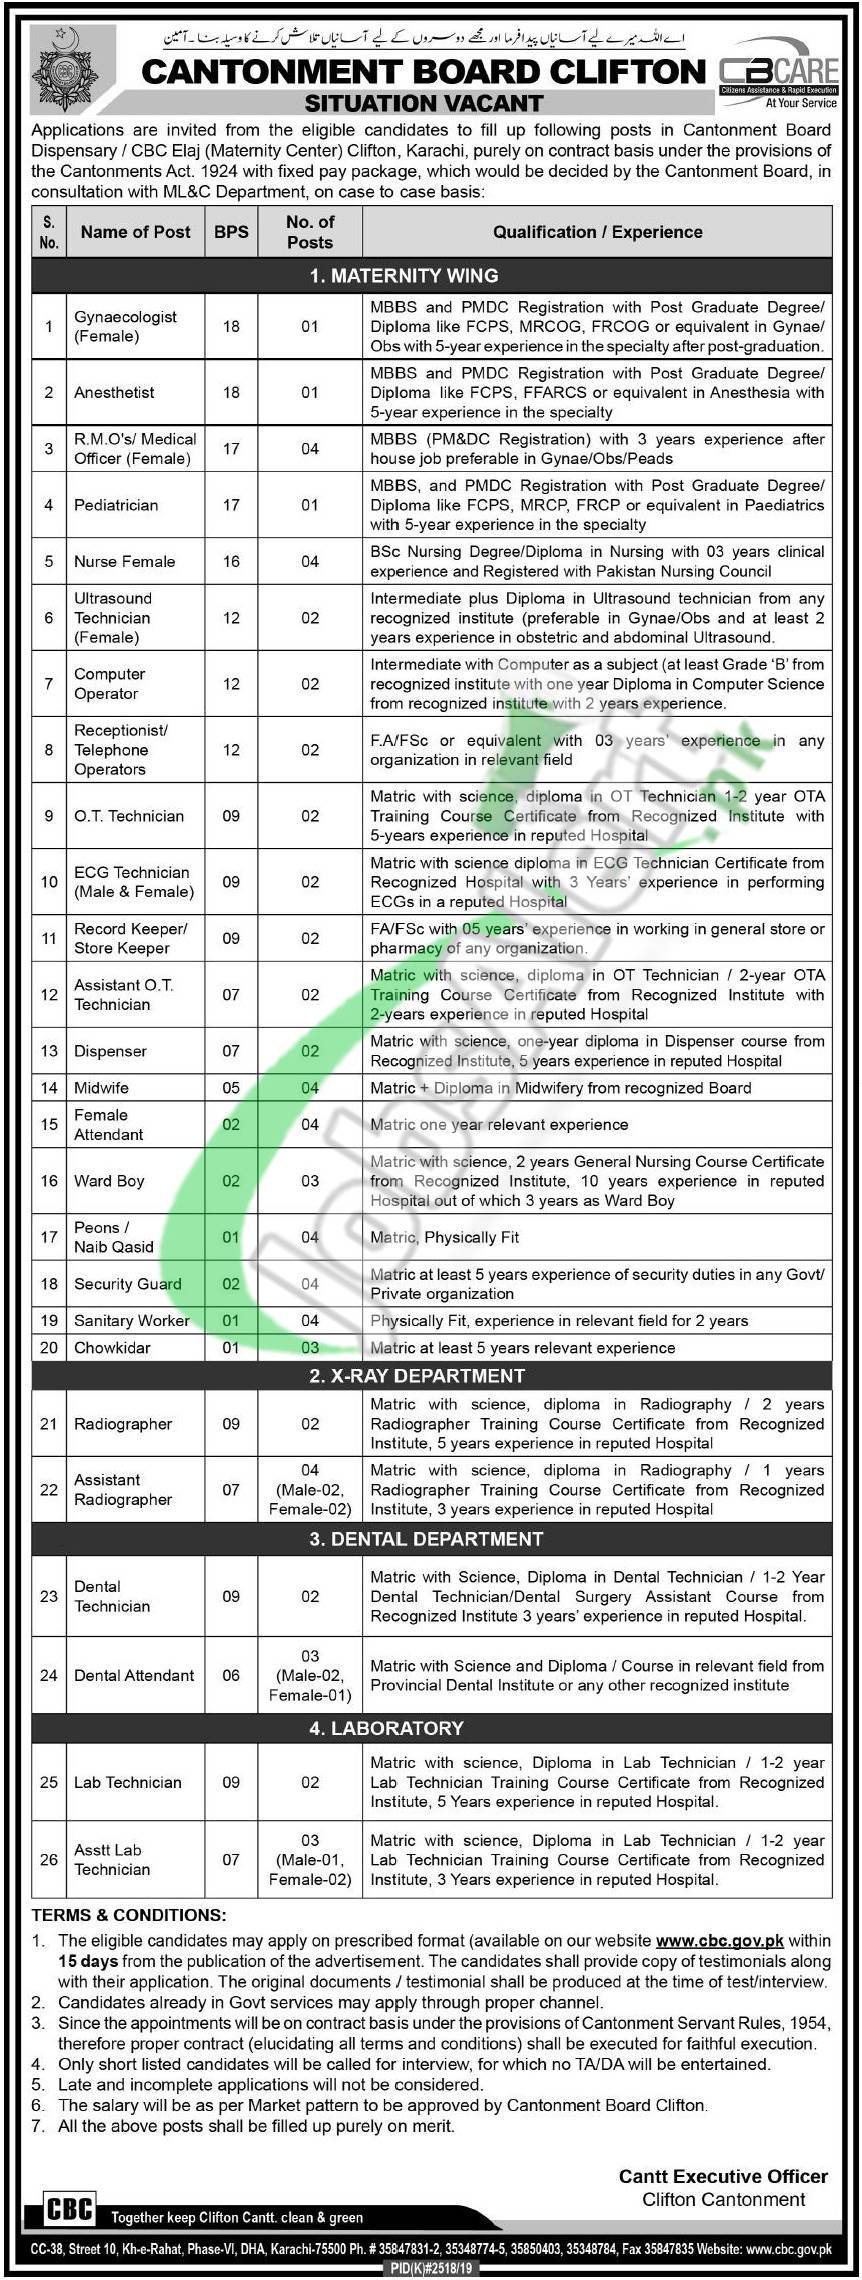 Cantonment Board Clifton Situation Vacant